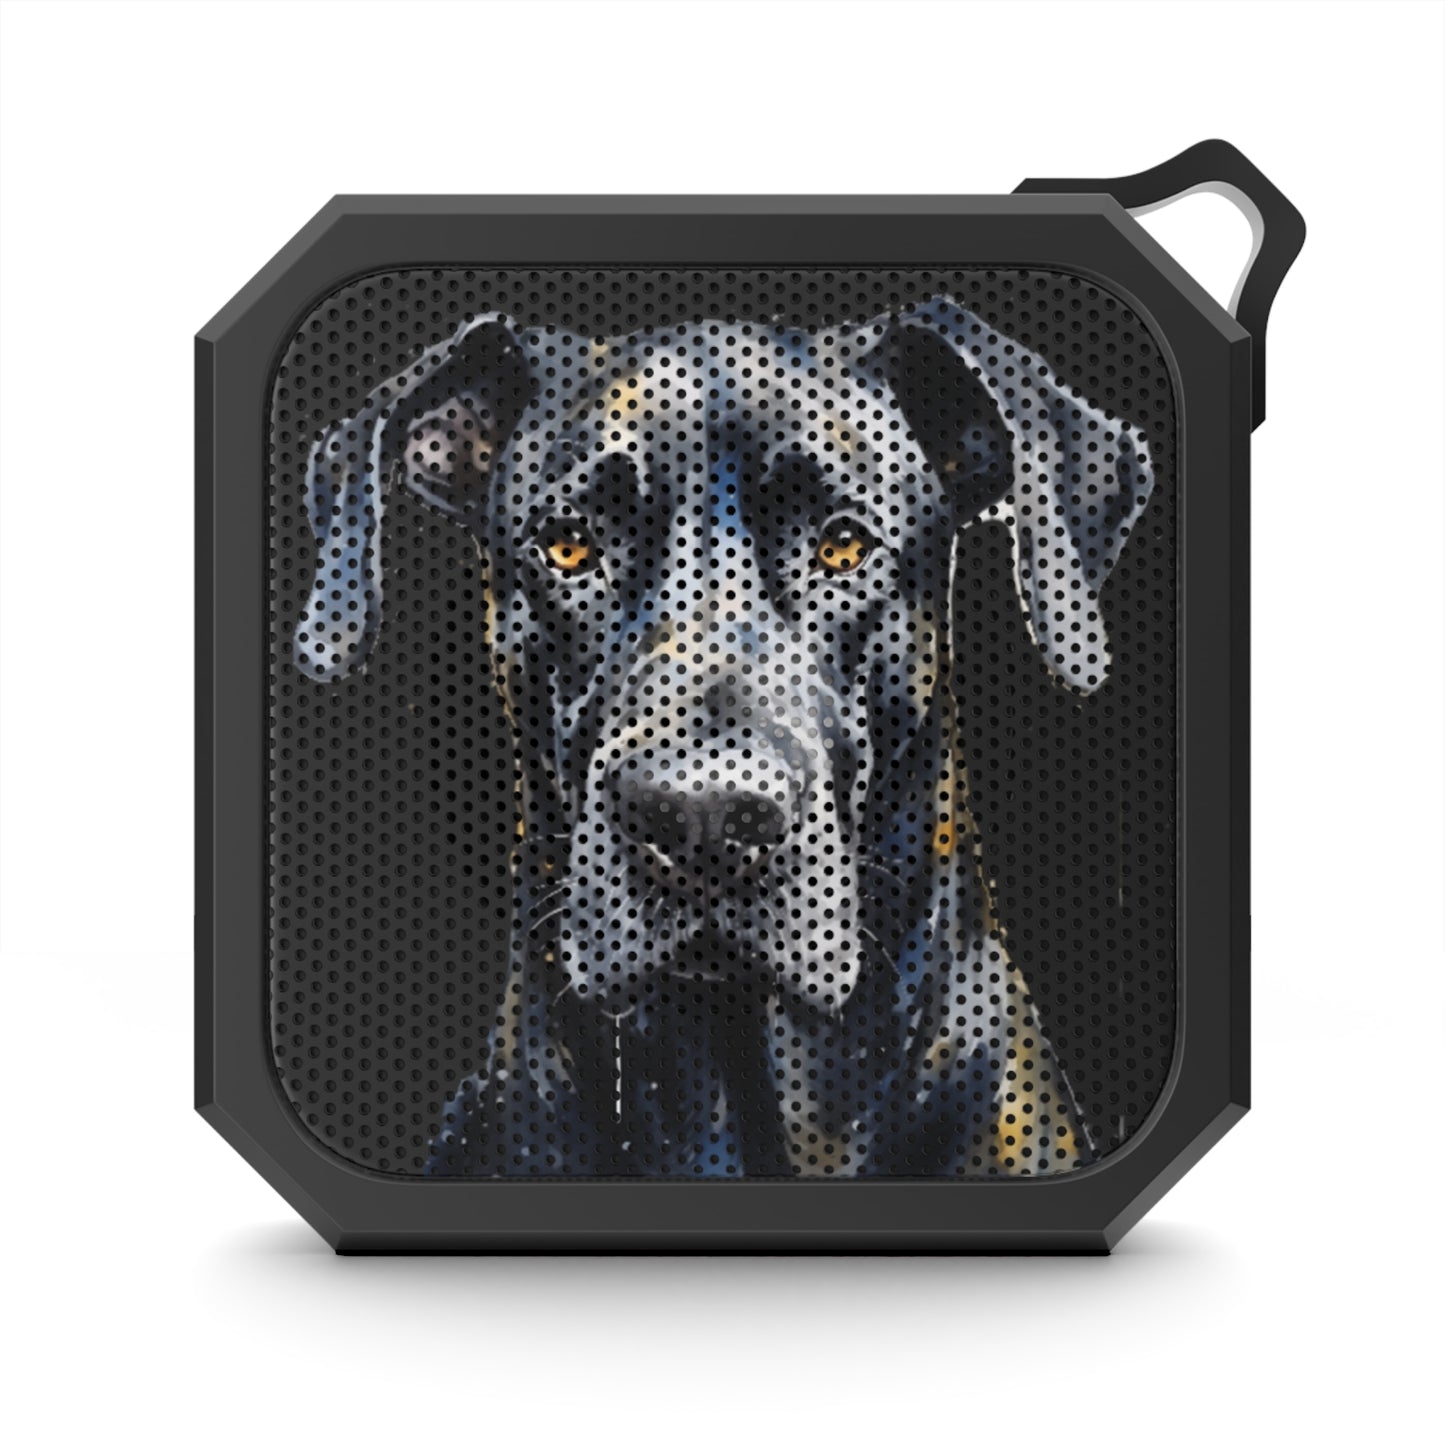 Great Dane Bluetooth 5.0 Speaker, Up to 12 Hours of Playtime, Portable Wireless Speaker with Dual Equalizer, Built-in Microphone, AUX Input, for Home, Outdoor, Party (Black)